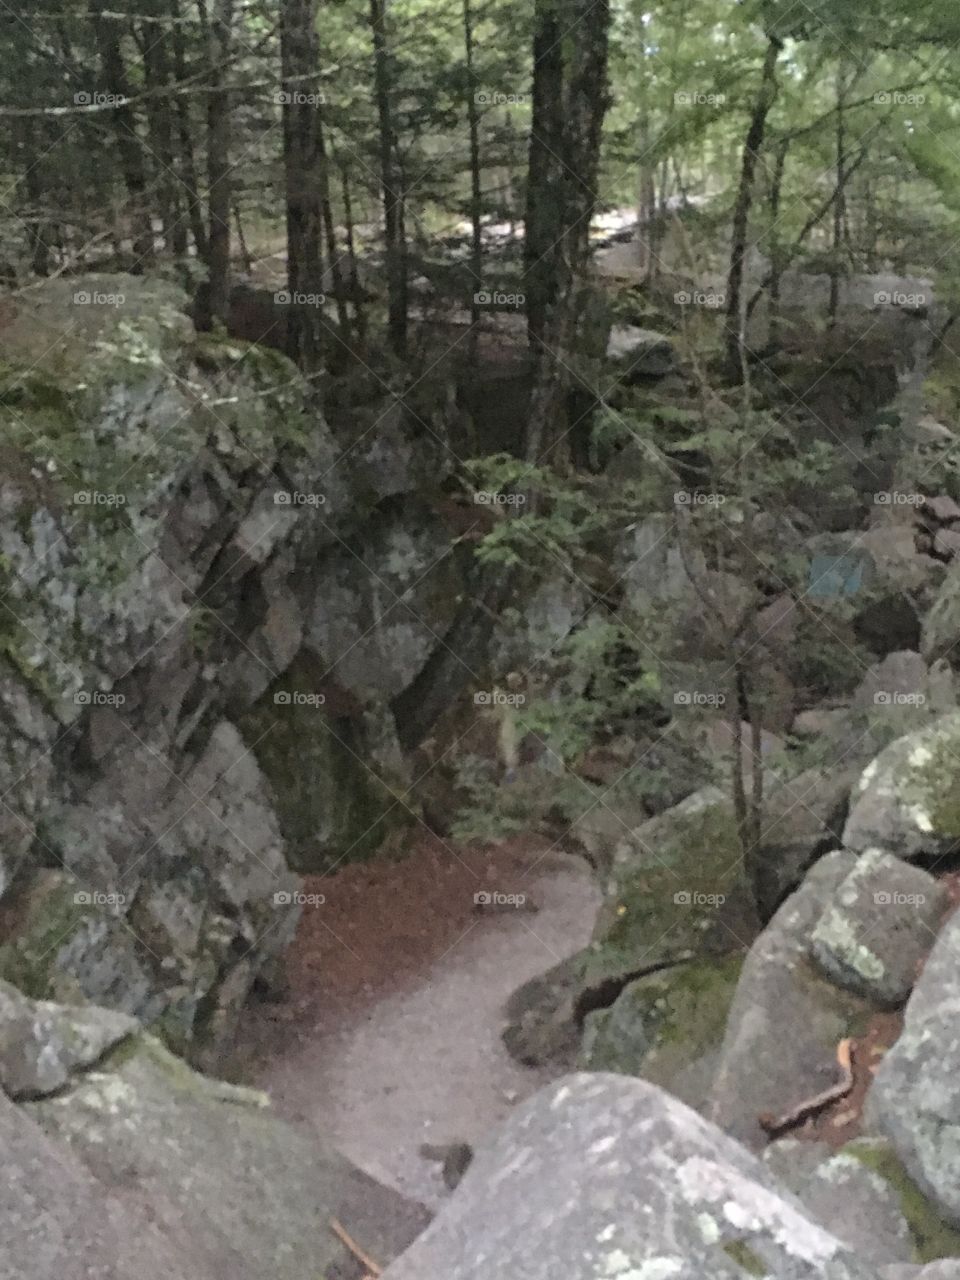 What was once a building now only some walls still standing at Purgatory Chasm in Massachusetts.